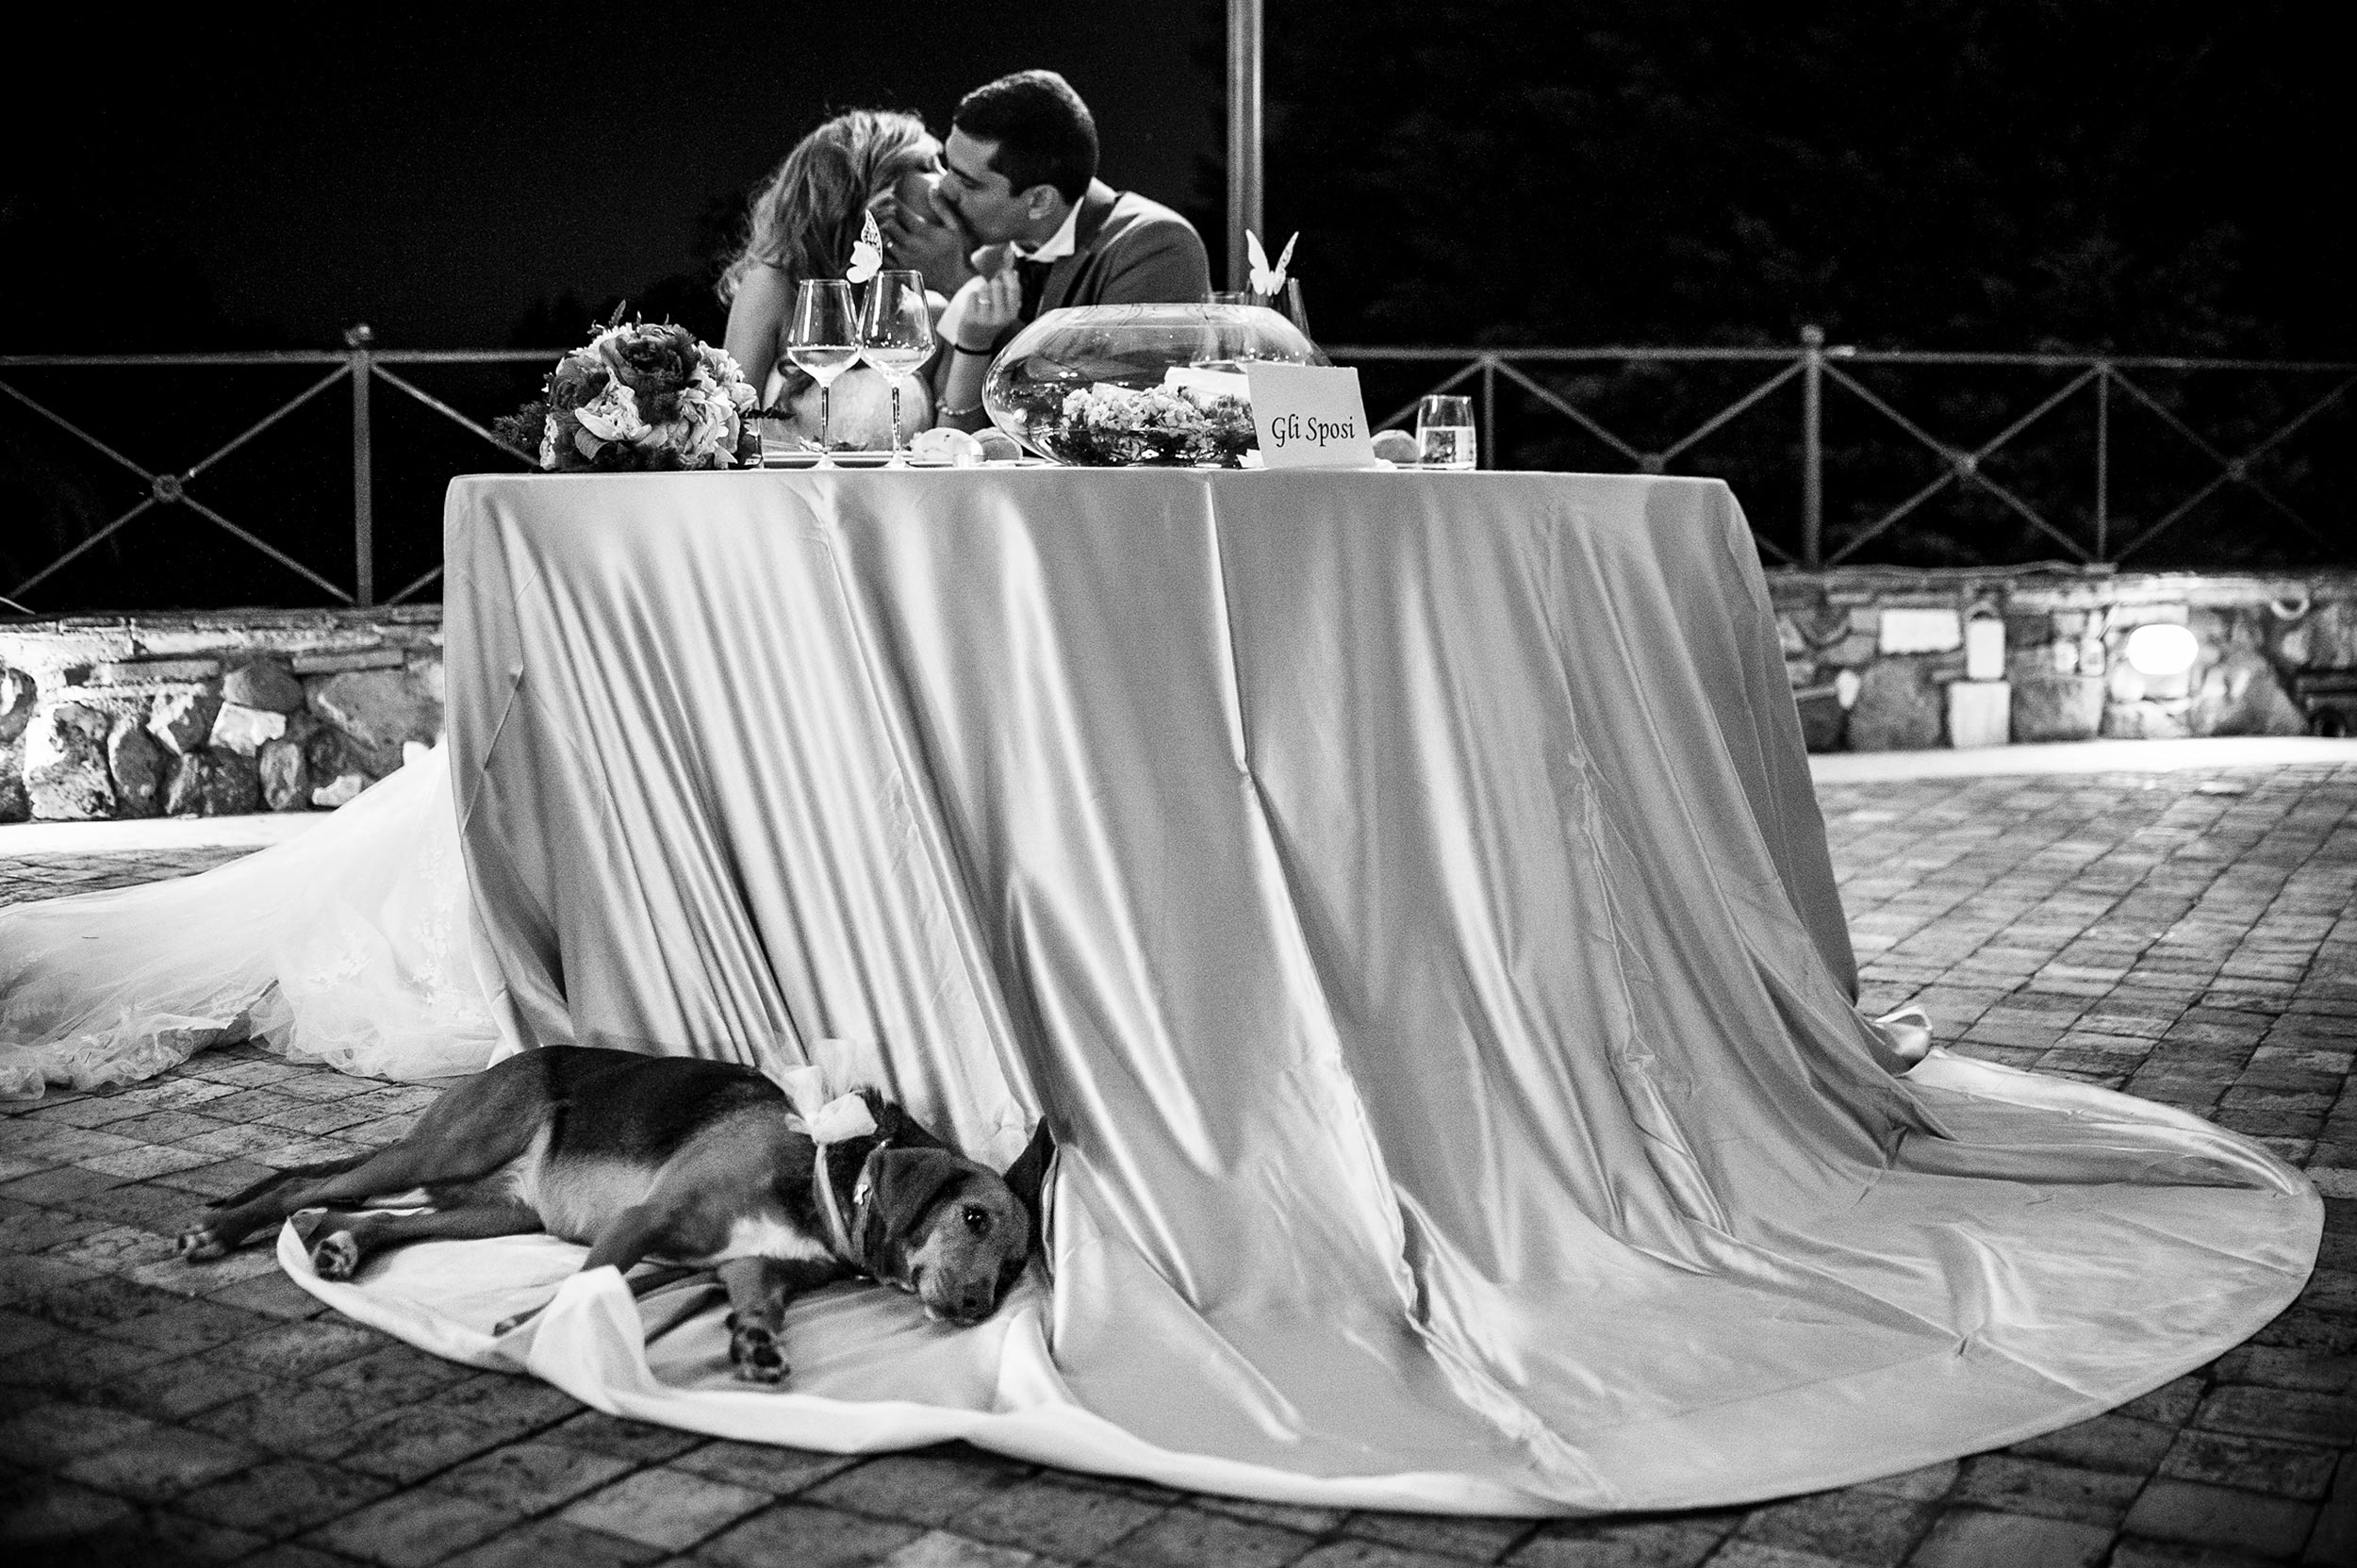 bride-and-grooms-dog-rests-under-nuptial-table-at-reception-black-and-white-wedding-photography.jpg